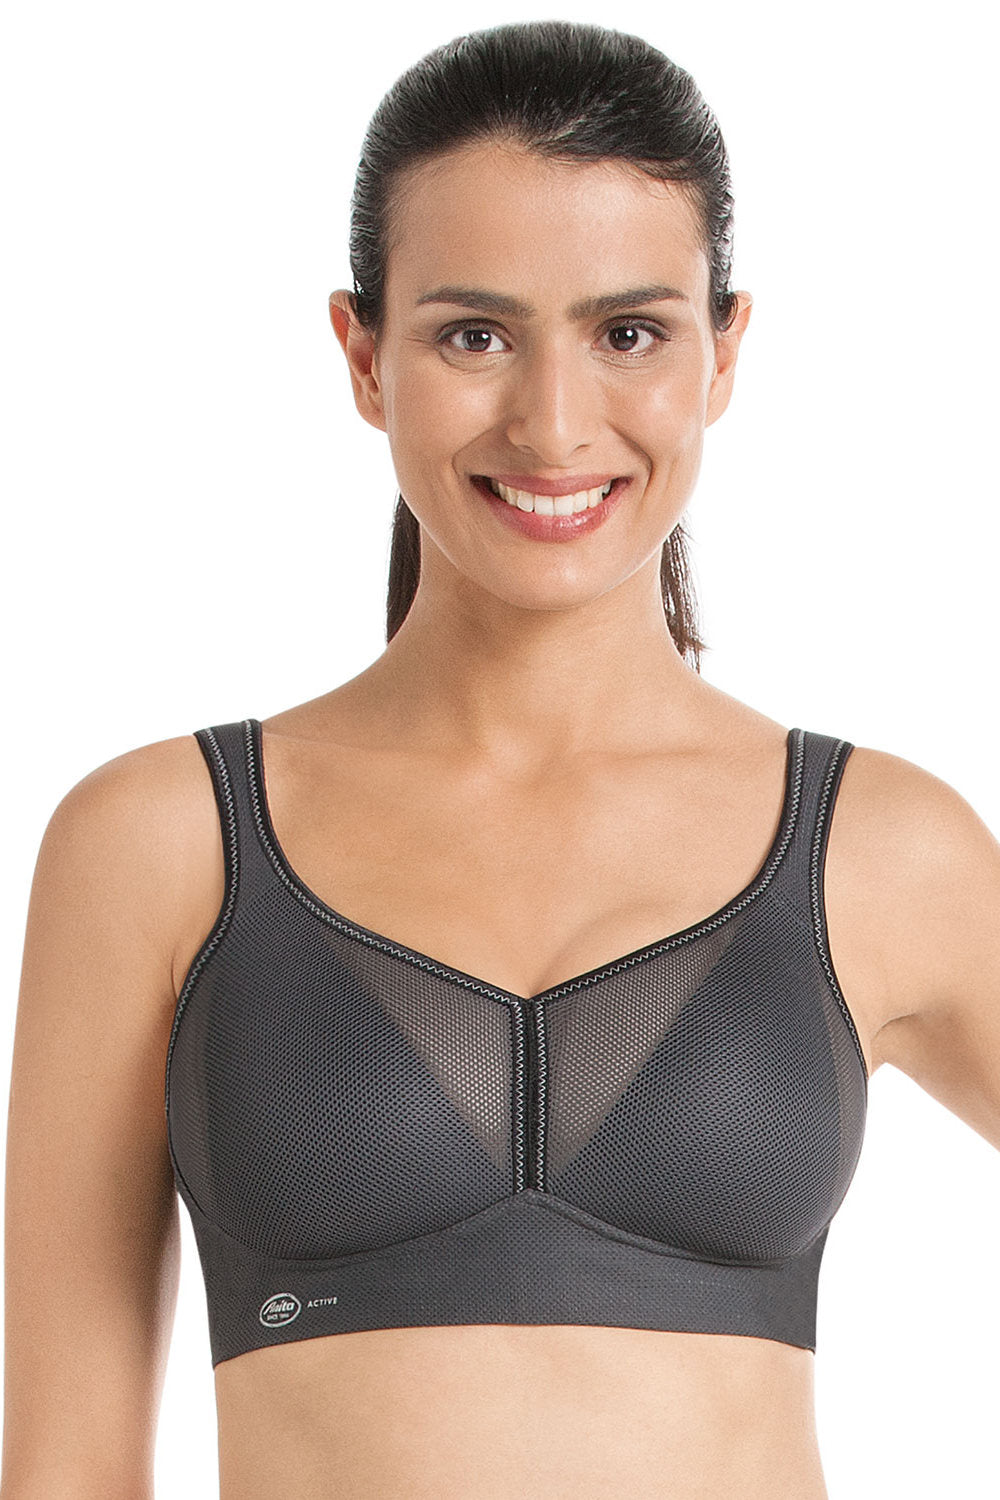 POKARLA Bras for Women Seamless Wireless Full-Coverage Adjustable Straps  Stretchy Underarm Smoothing Lightly Lined Bra